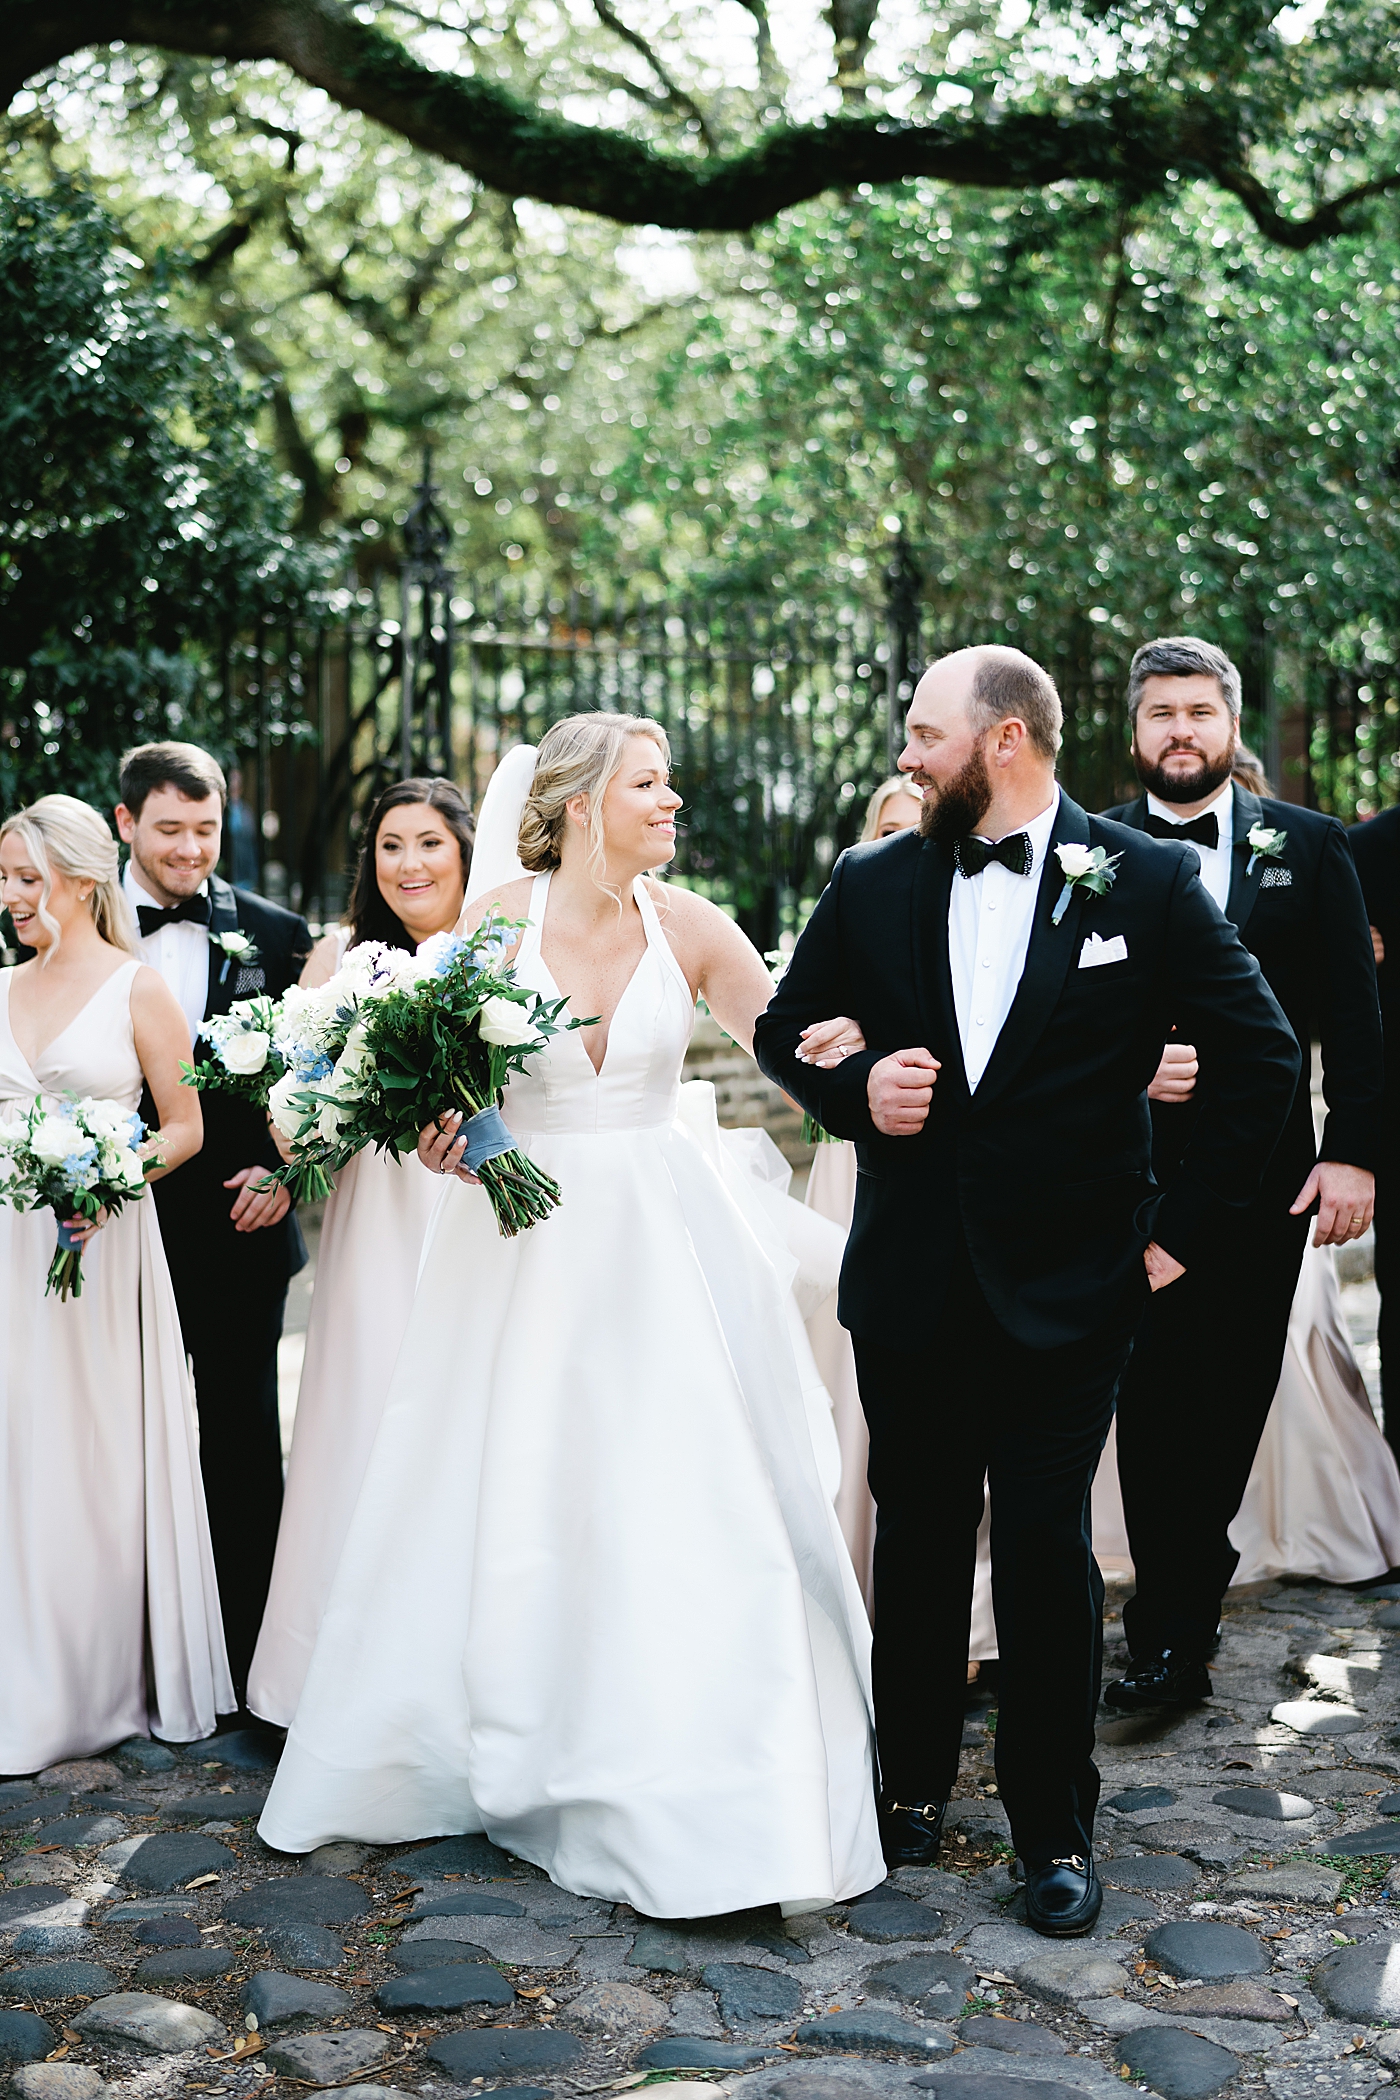 Bride and groom walking on a cobblestone street with their wedding party | Image by Annie Laura Photo